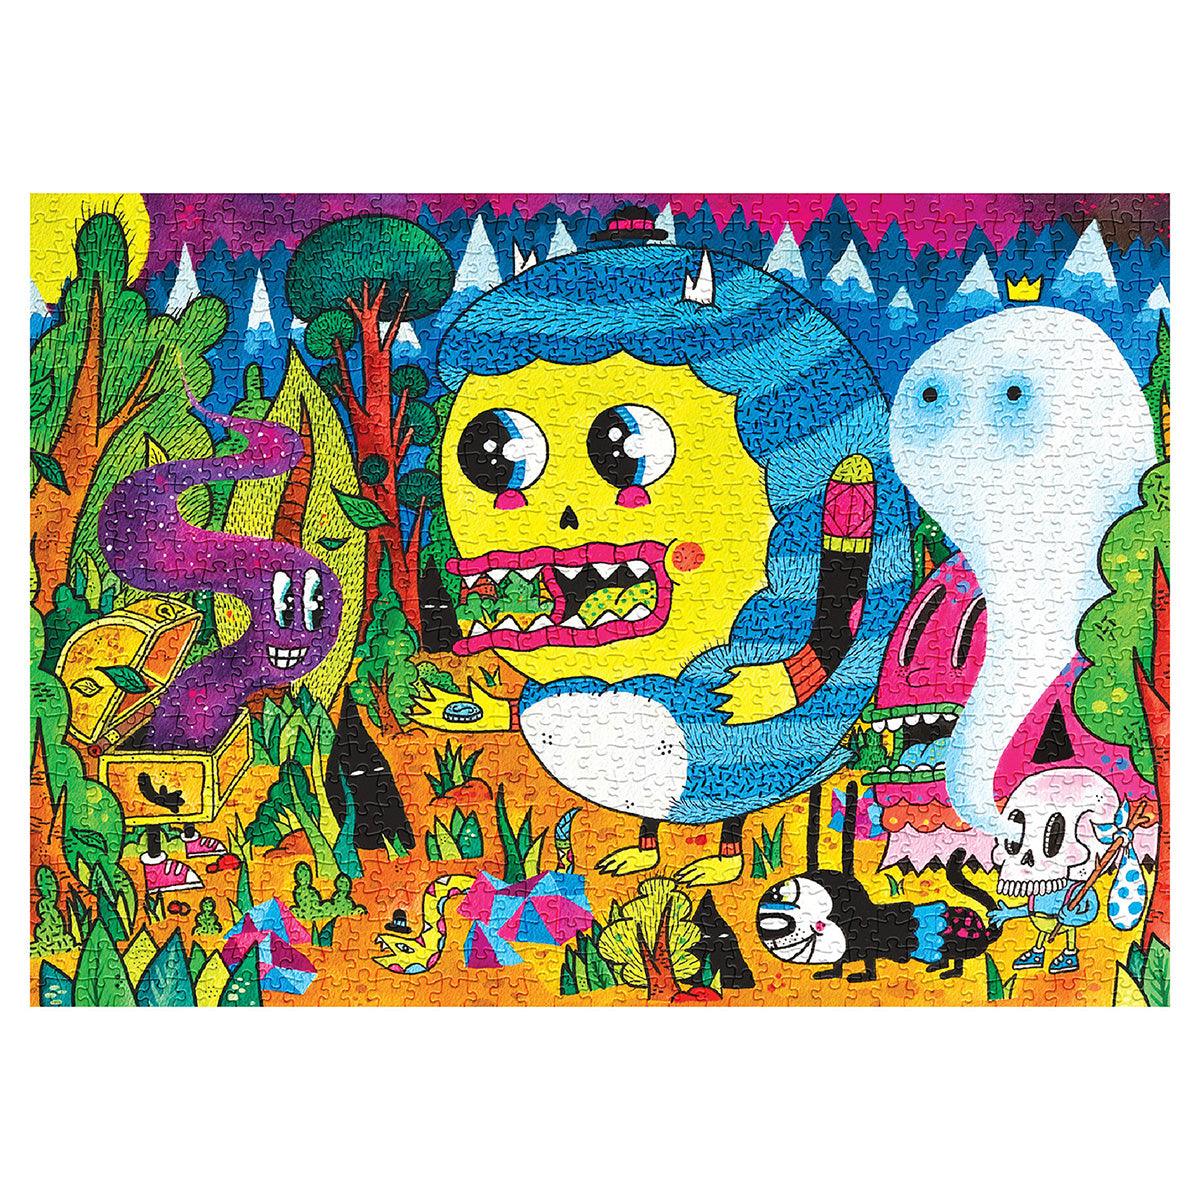 SOONNESS 1000 piece puzzle Treasure Hunters by illustrator Frenemy art 